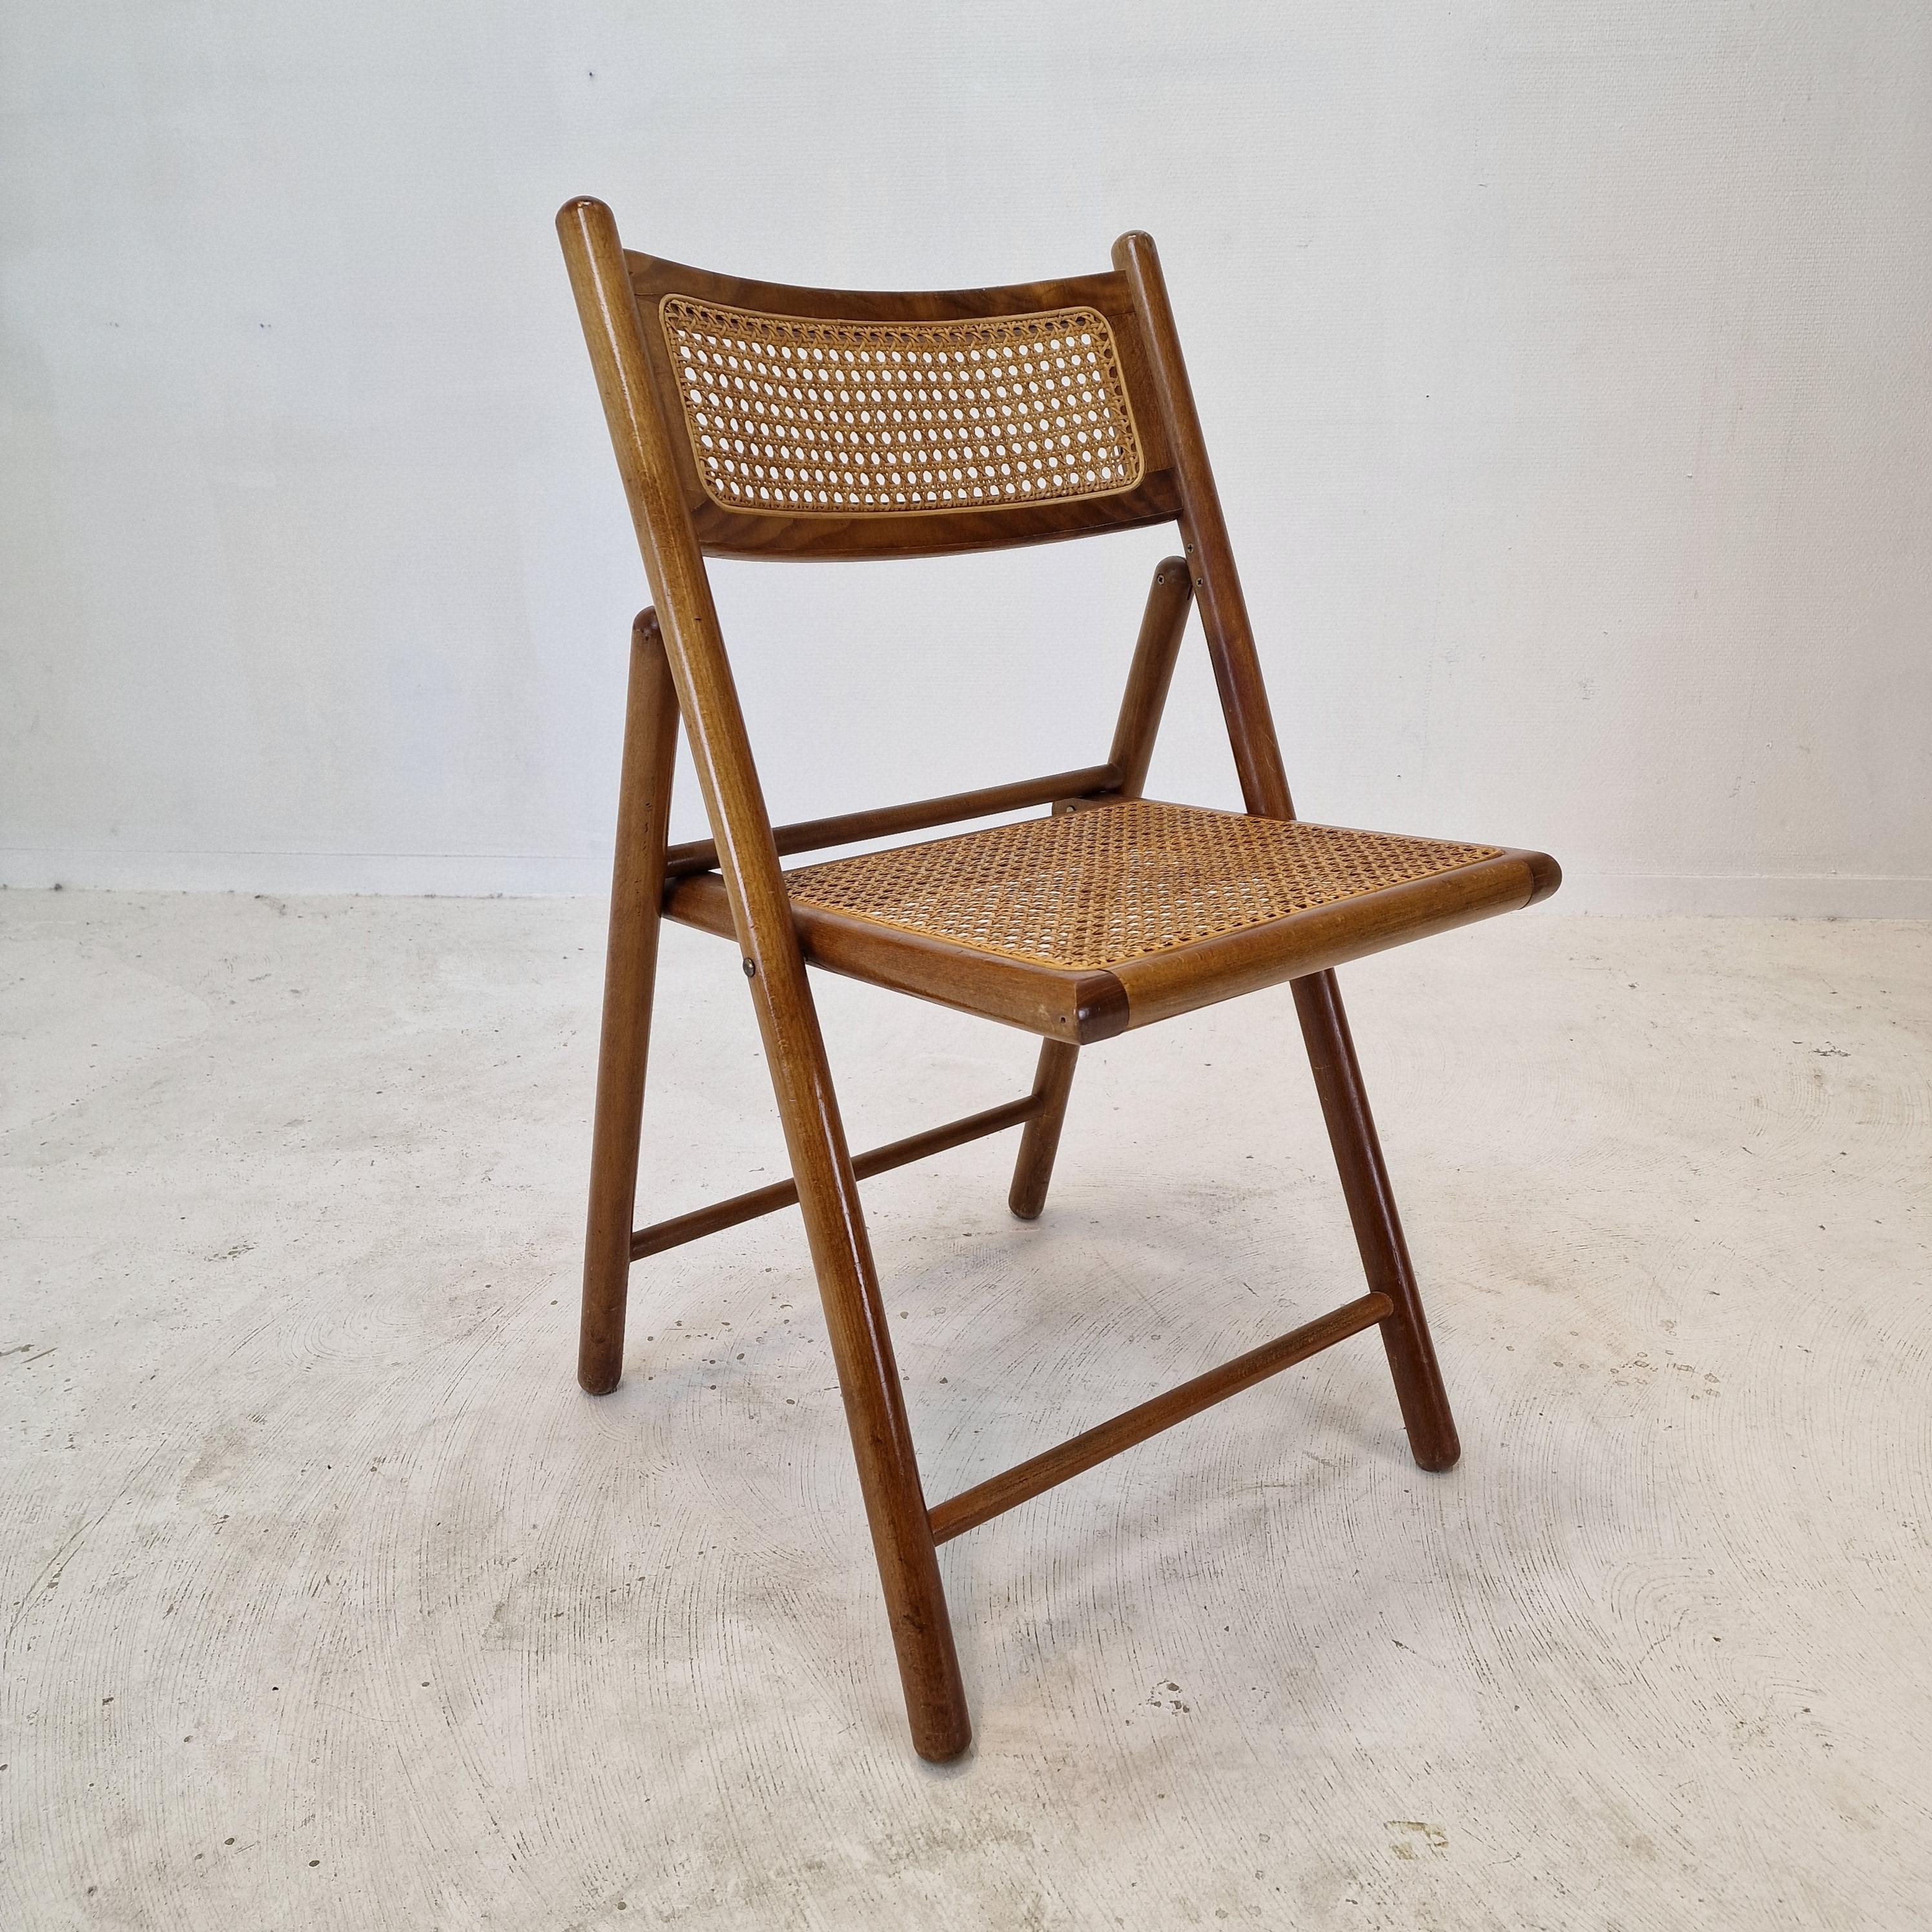 Set of 4 Italian Folding Chairs with Rattan, 1980s For Sale 4